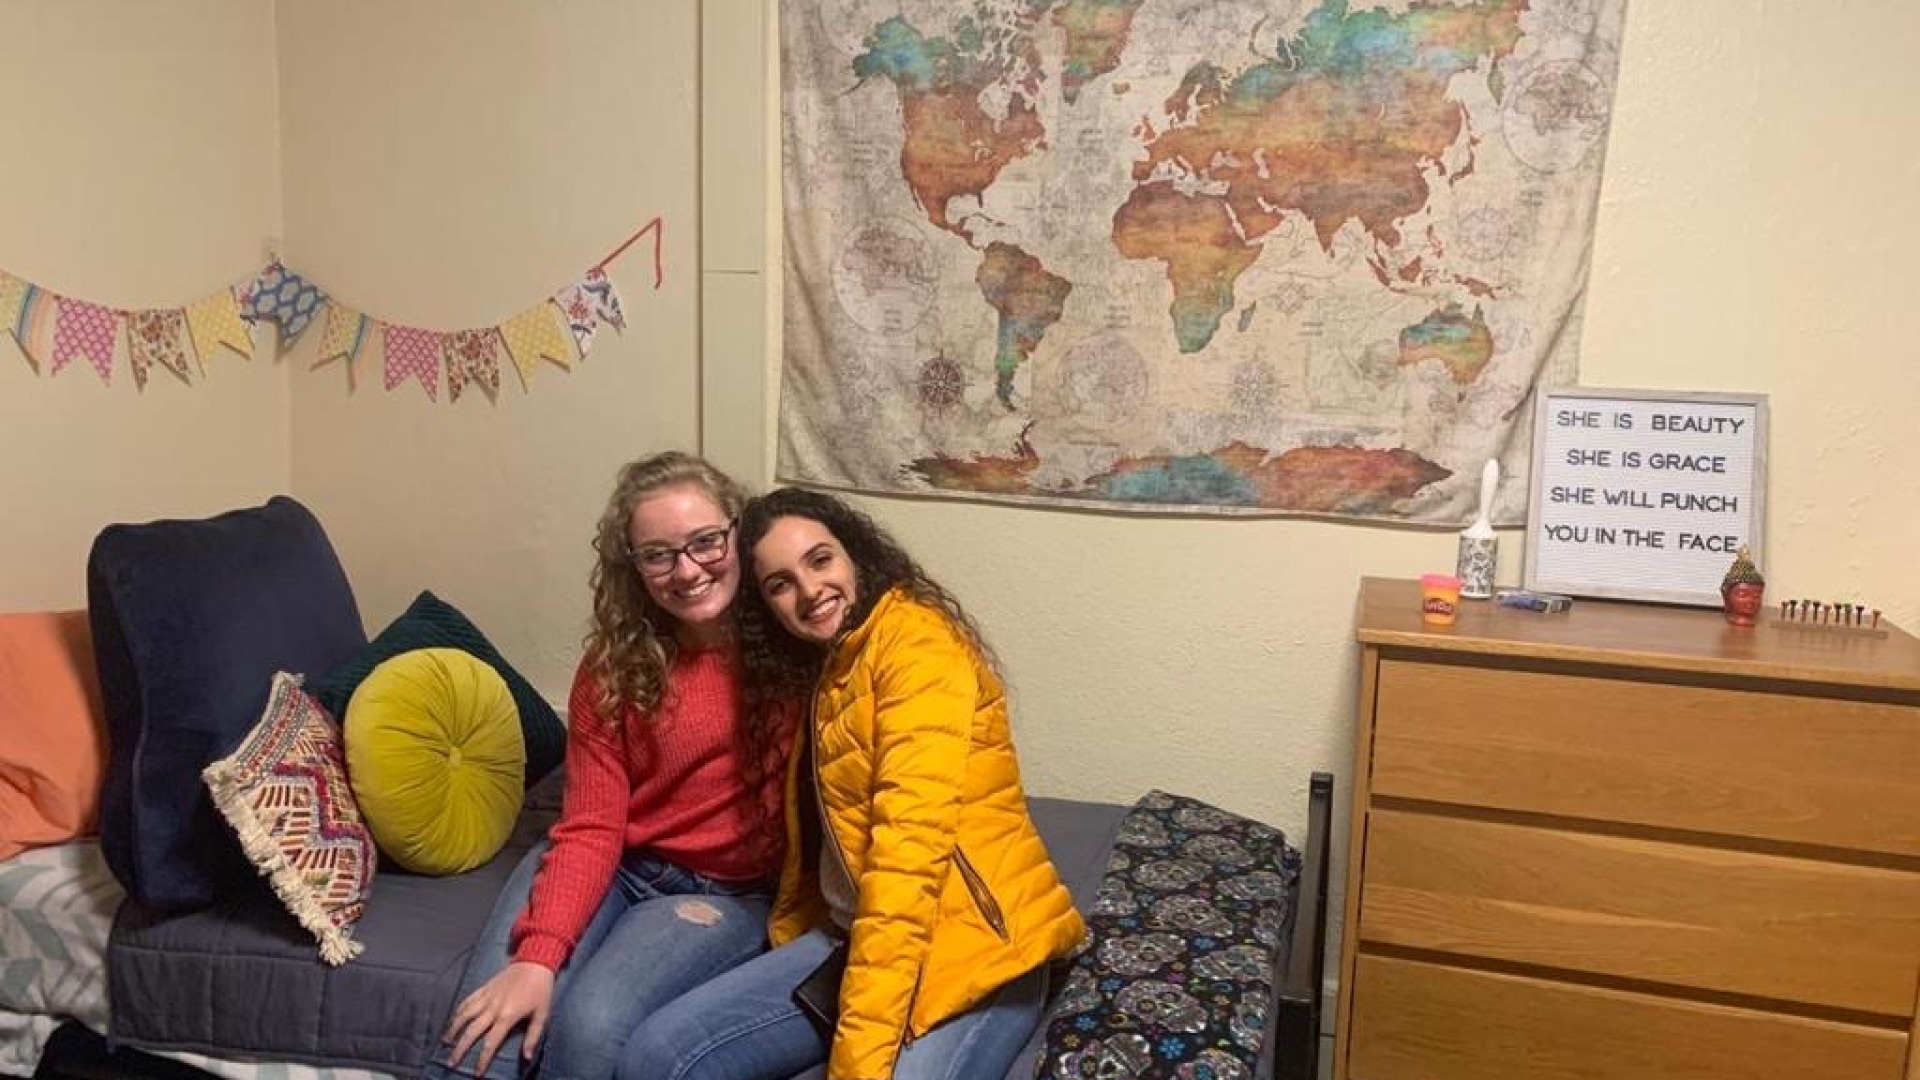 Me and Anto in our first year dorm room together